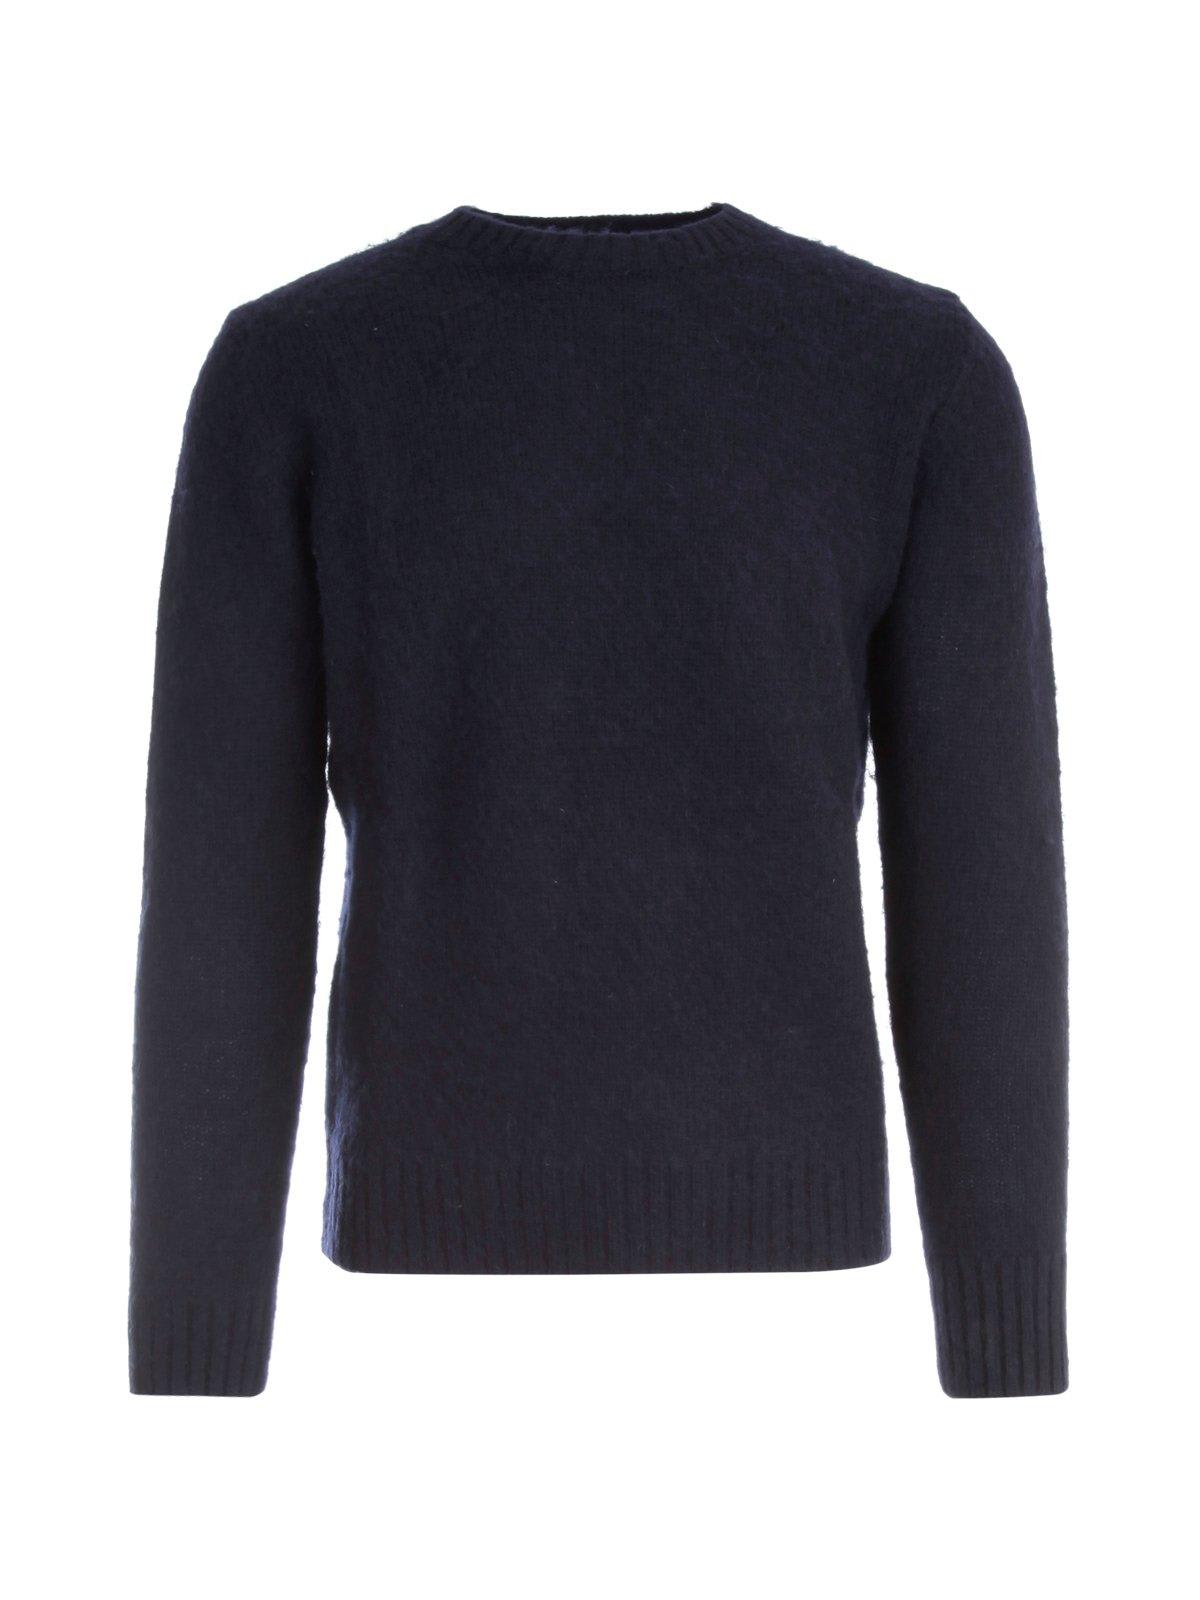 Aspesi Crewneck Knitted Sweater In Navy